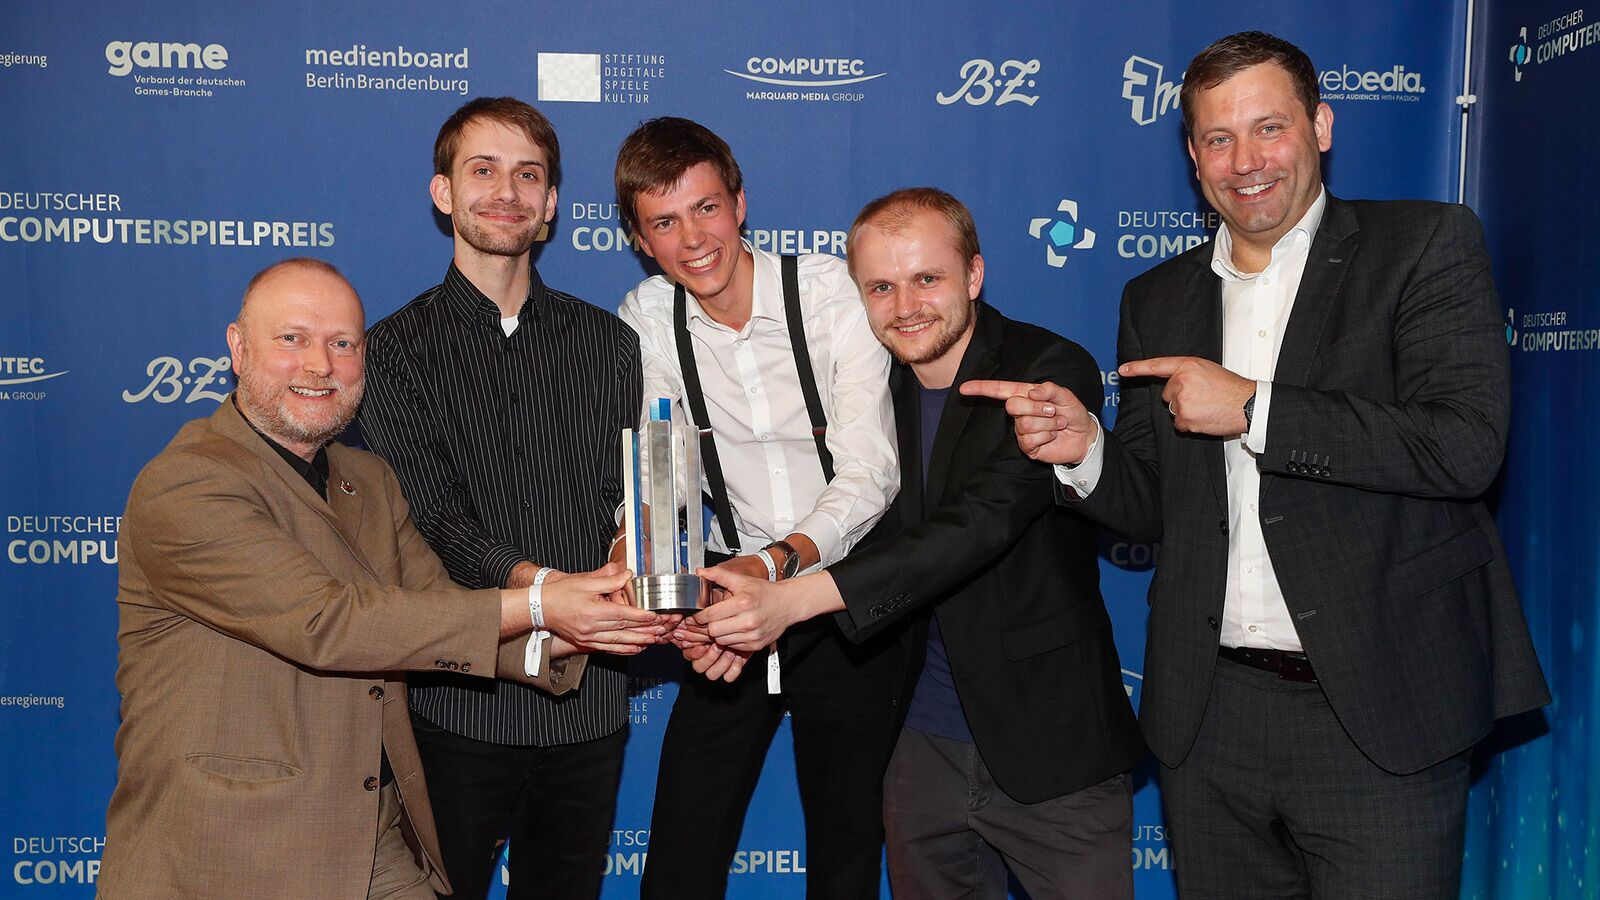 Team A Juggler's Tale with their German Computer Games Award